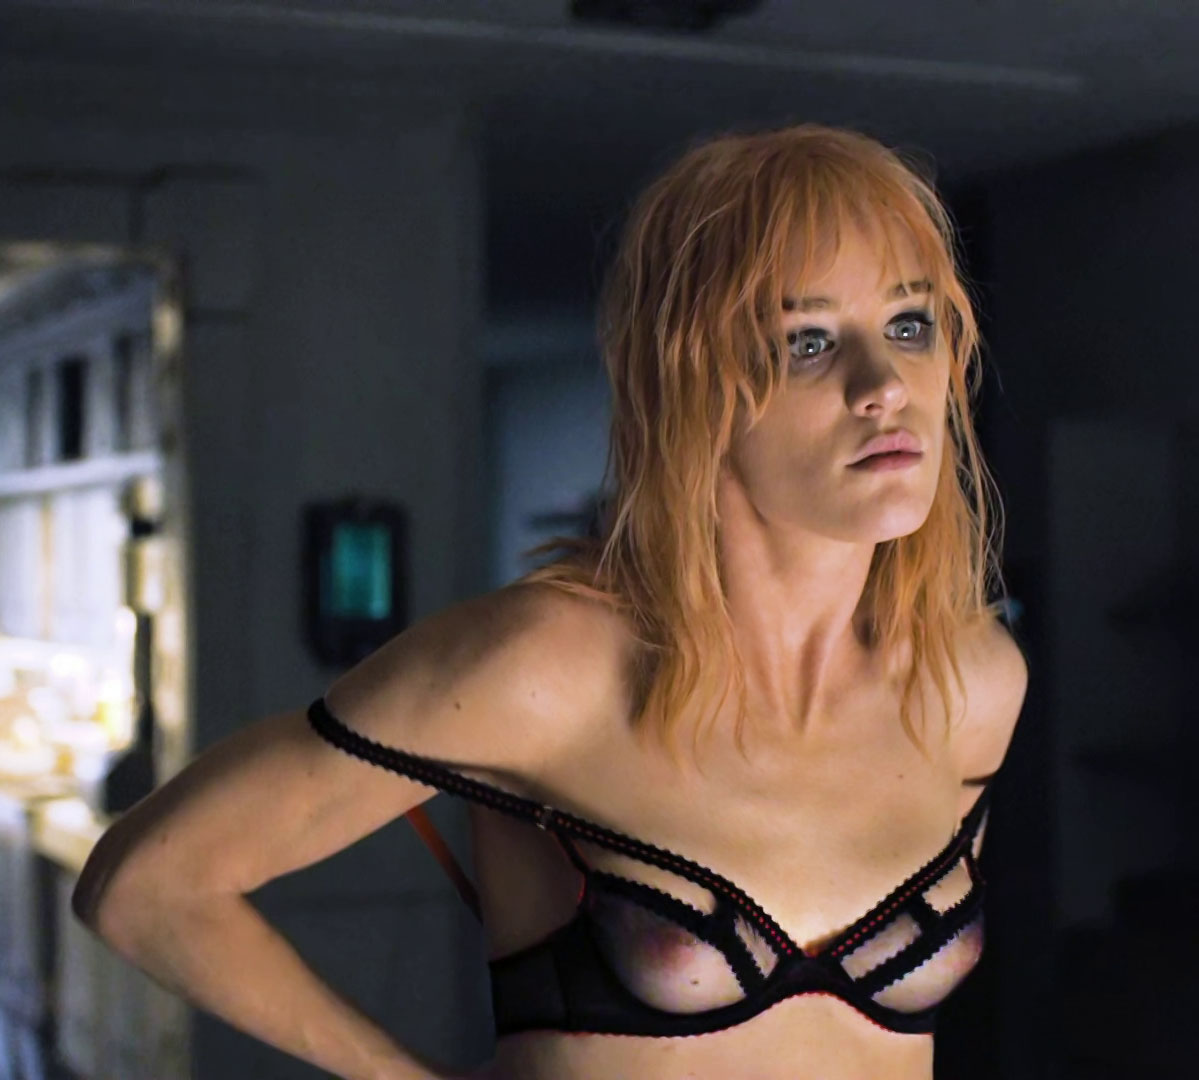 Flaunting her assets: mackenzie davis sizzles in these topless shots